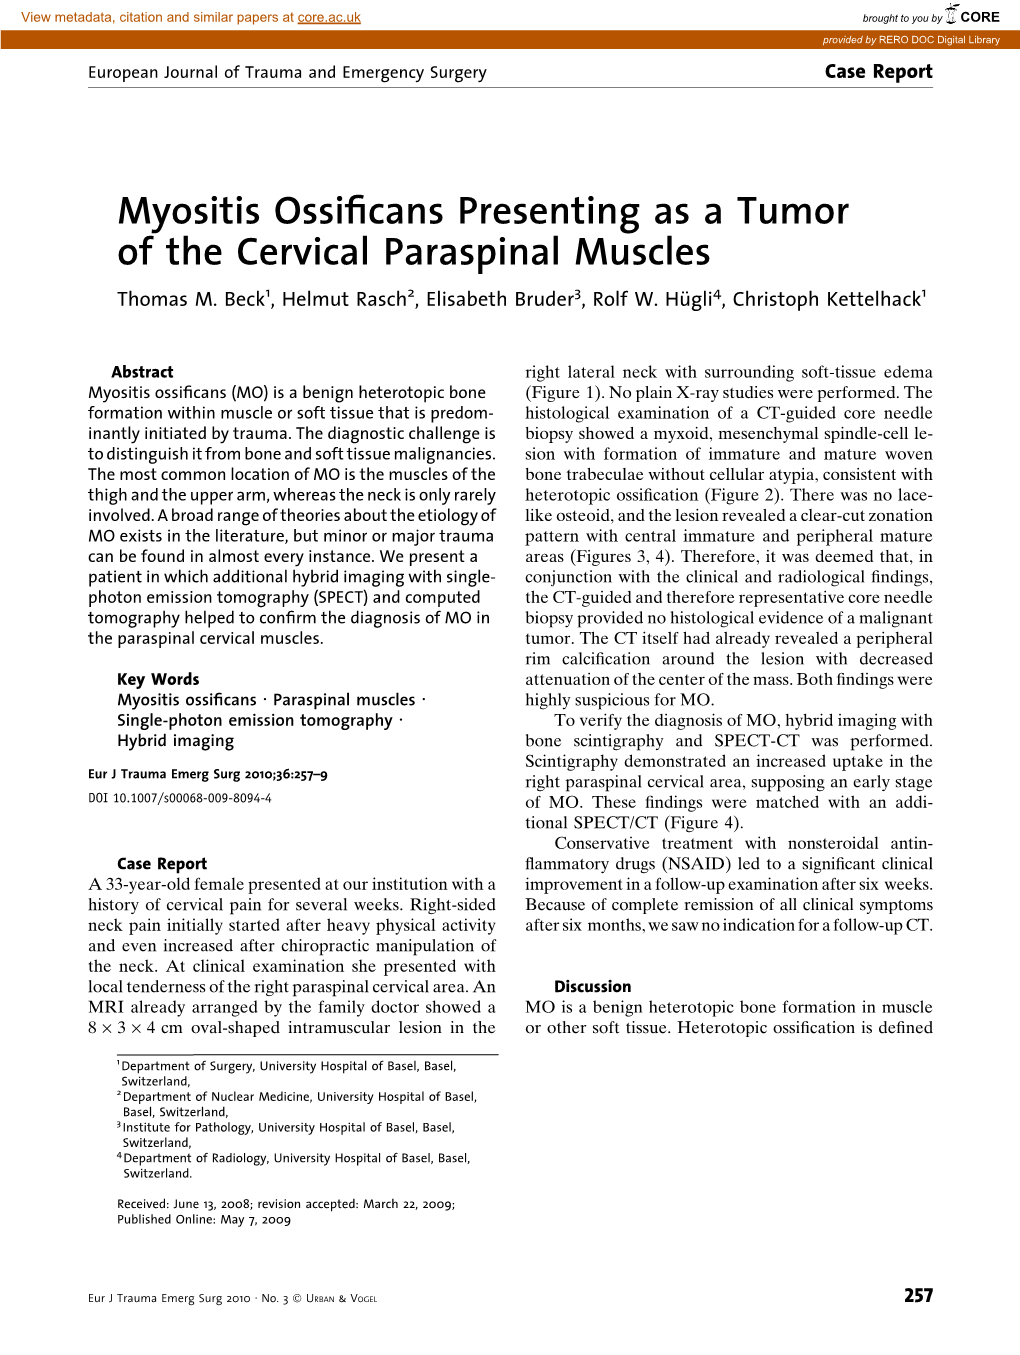 Myositis Ossificans Presenting As a Tumor of the Cervical Paraspinal Muscles